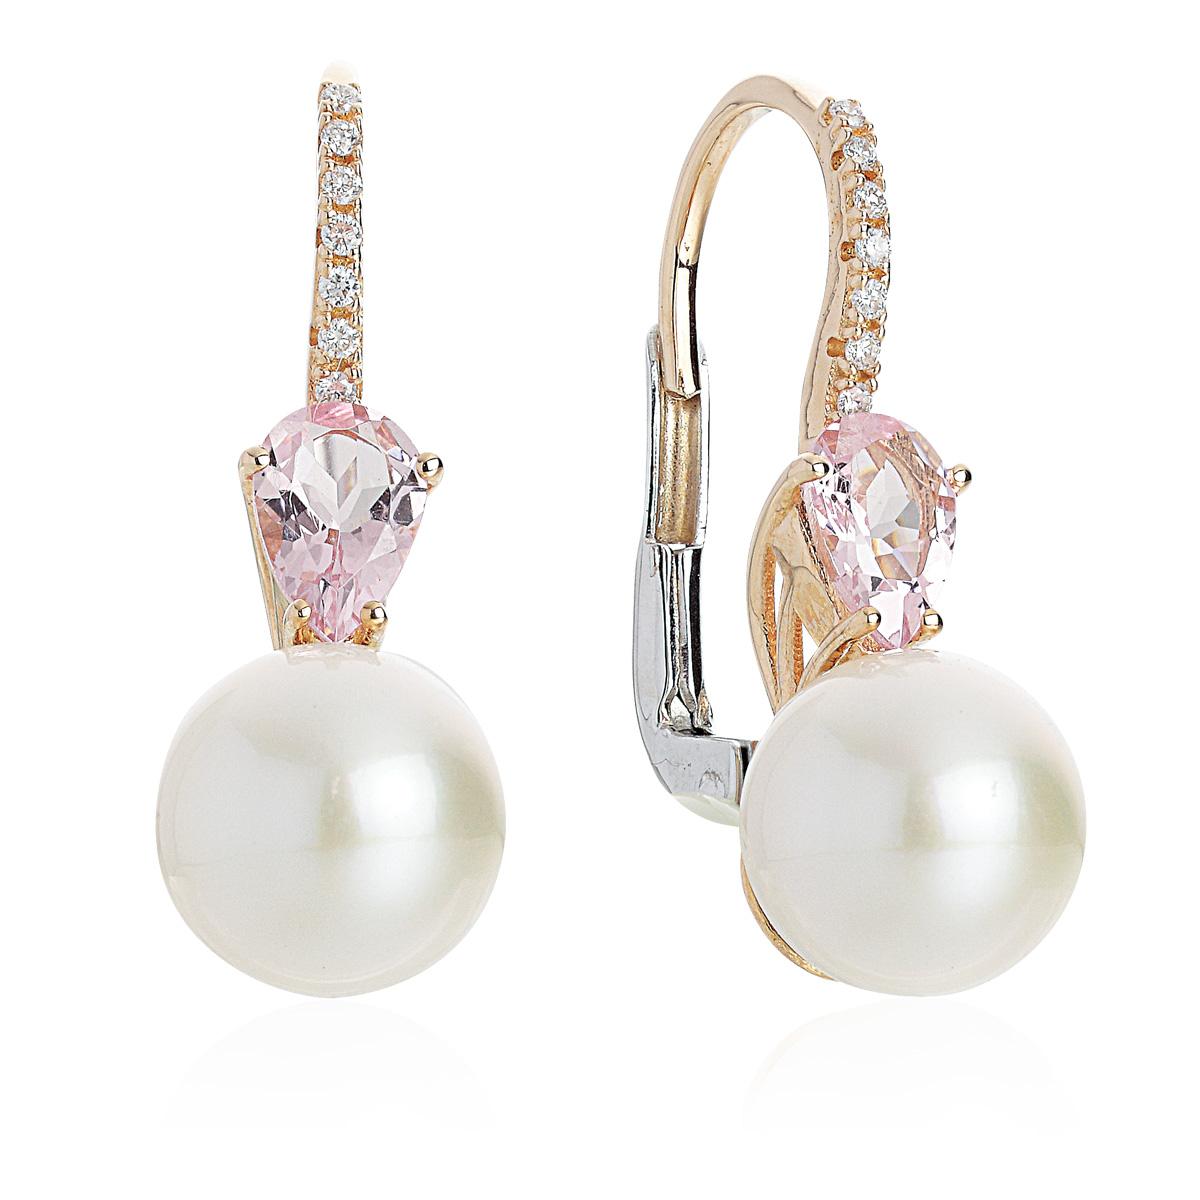 Hook earrings in 18kt gold, with sea pearl, morganite and diamonds - OD396/MO-LH